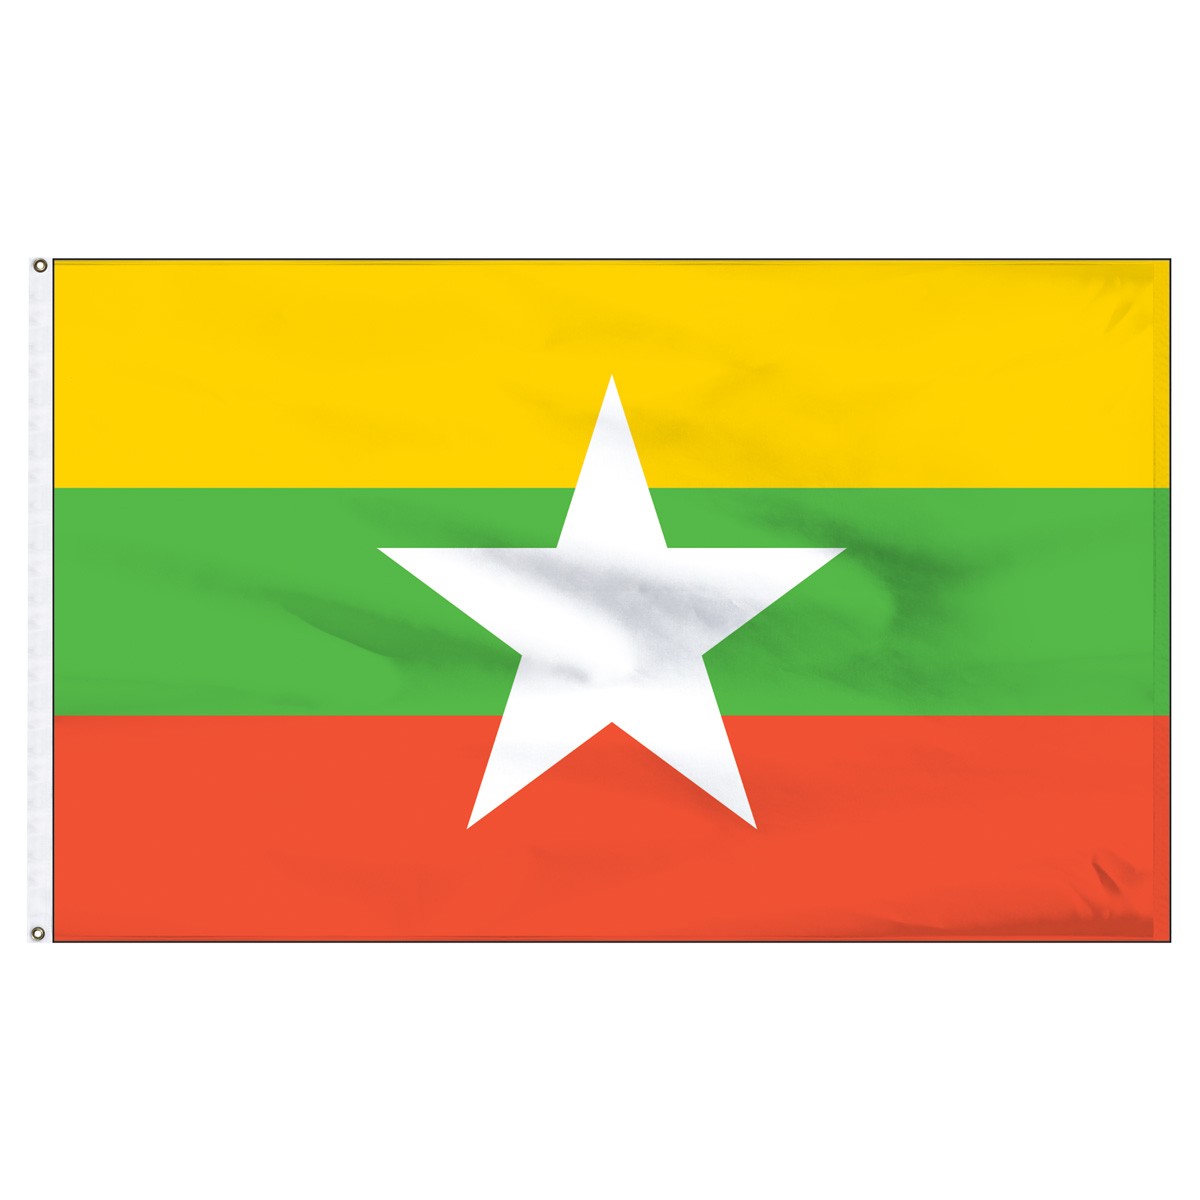 Myanmar Submit Flags and Flags